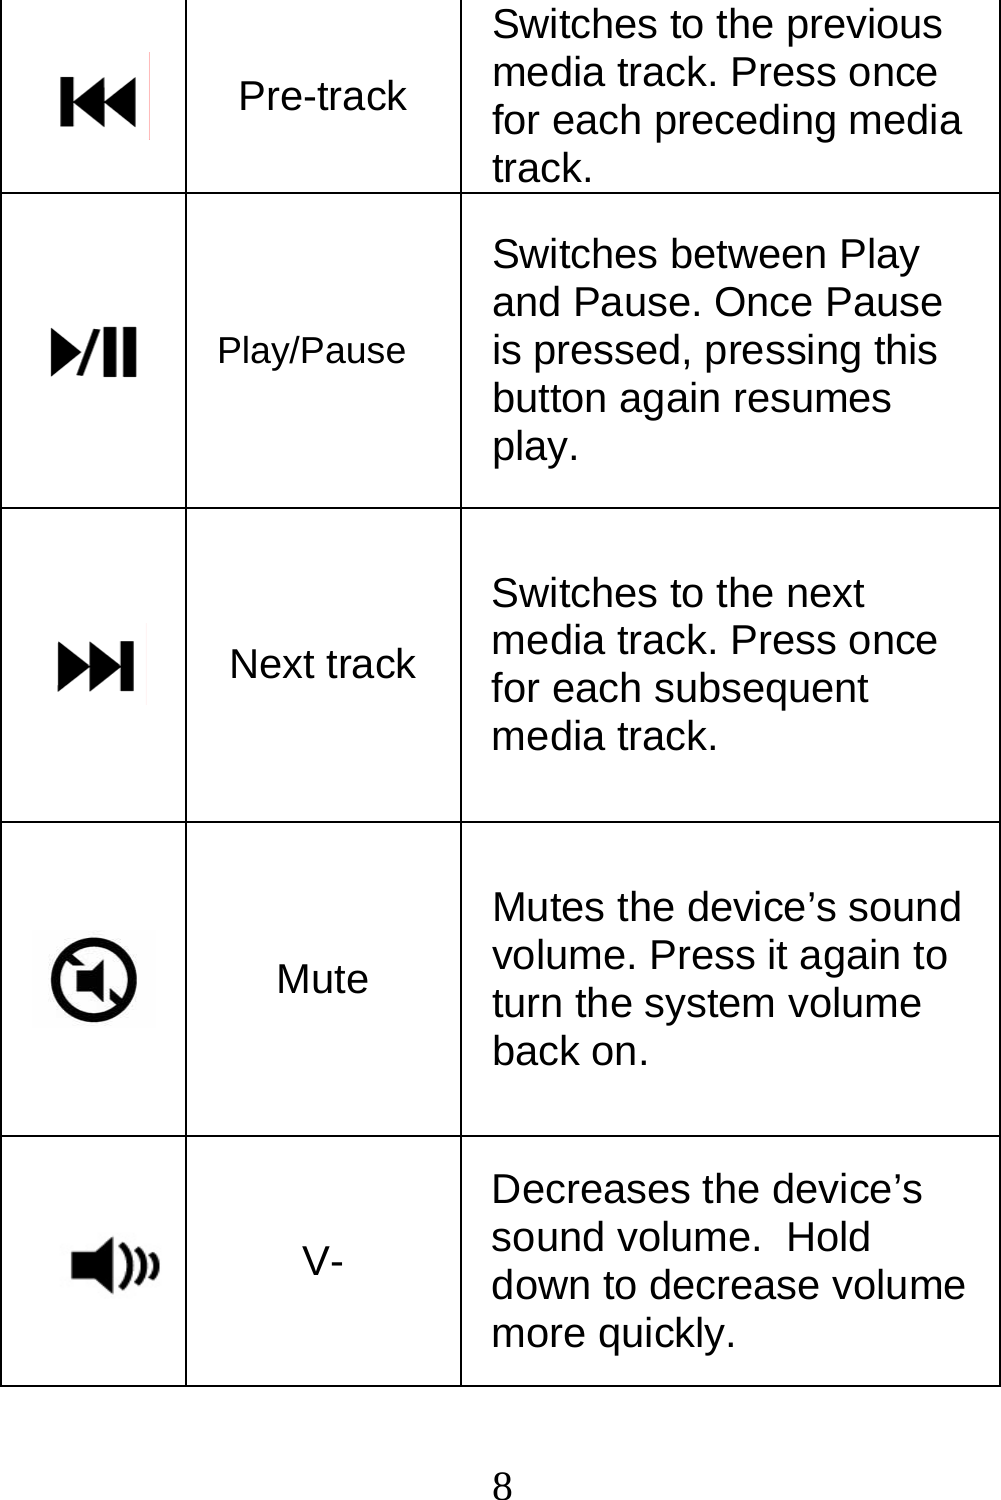  8 Pre-track Switches to the previous media track. Press once for each preceding media track.  Play/Pause Switches between Play and Pause. Once Pause is pressed, pressing this button again resumes play.  Next track Switches to the next media track. Press once for each subsequent media track.  Mute Mutes the device’s sound volume. Press it again to turn the system volume back on. V- Decreases the device’s sound volume.  Hold down to decrease volume more quickly. 